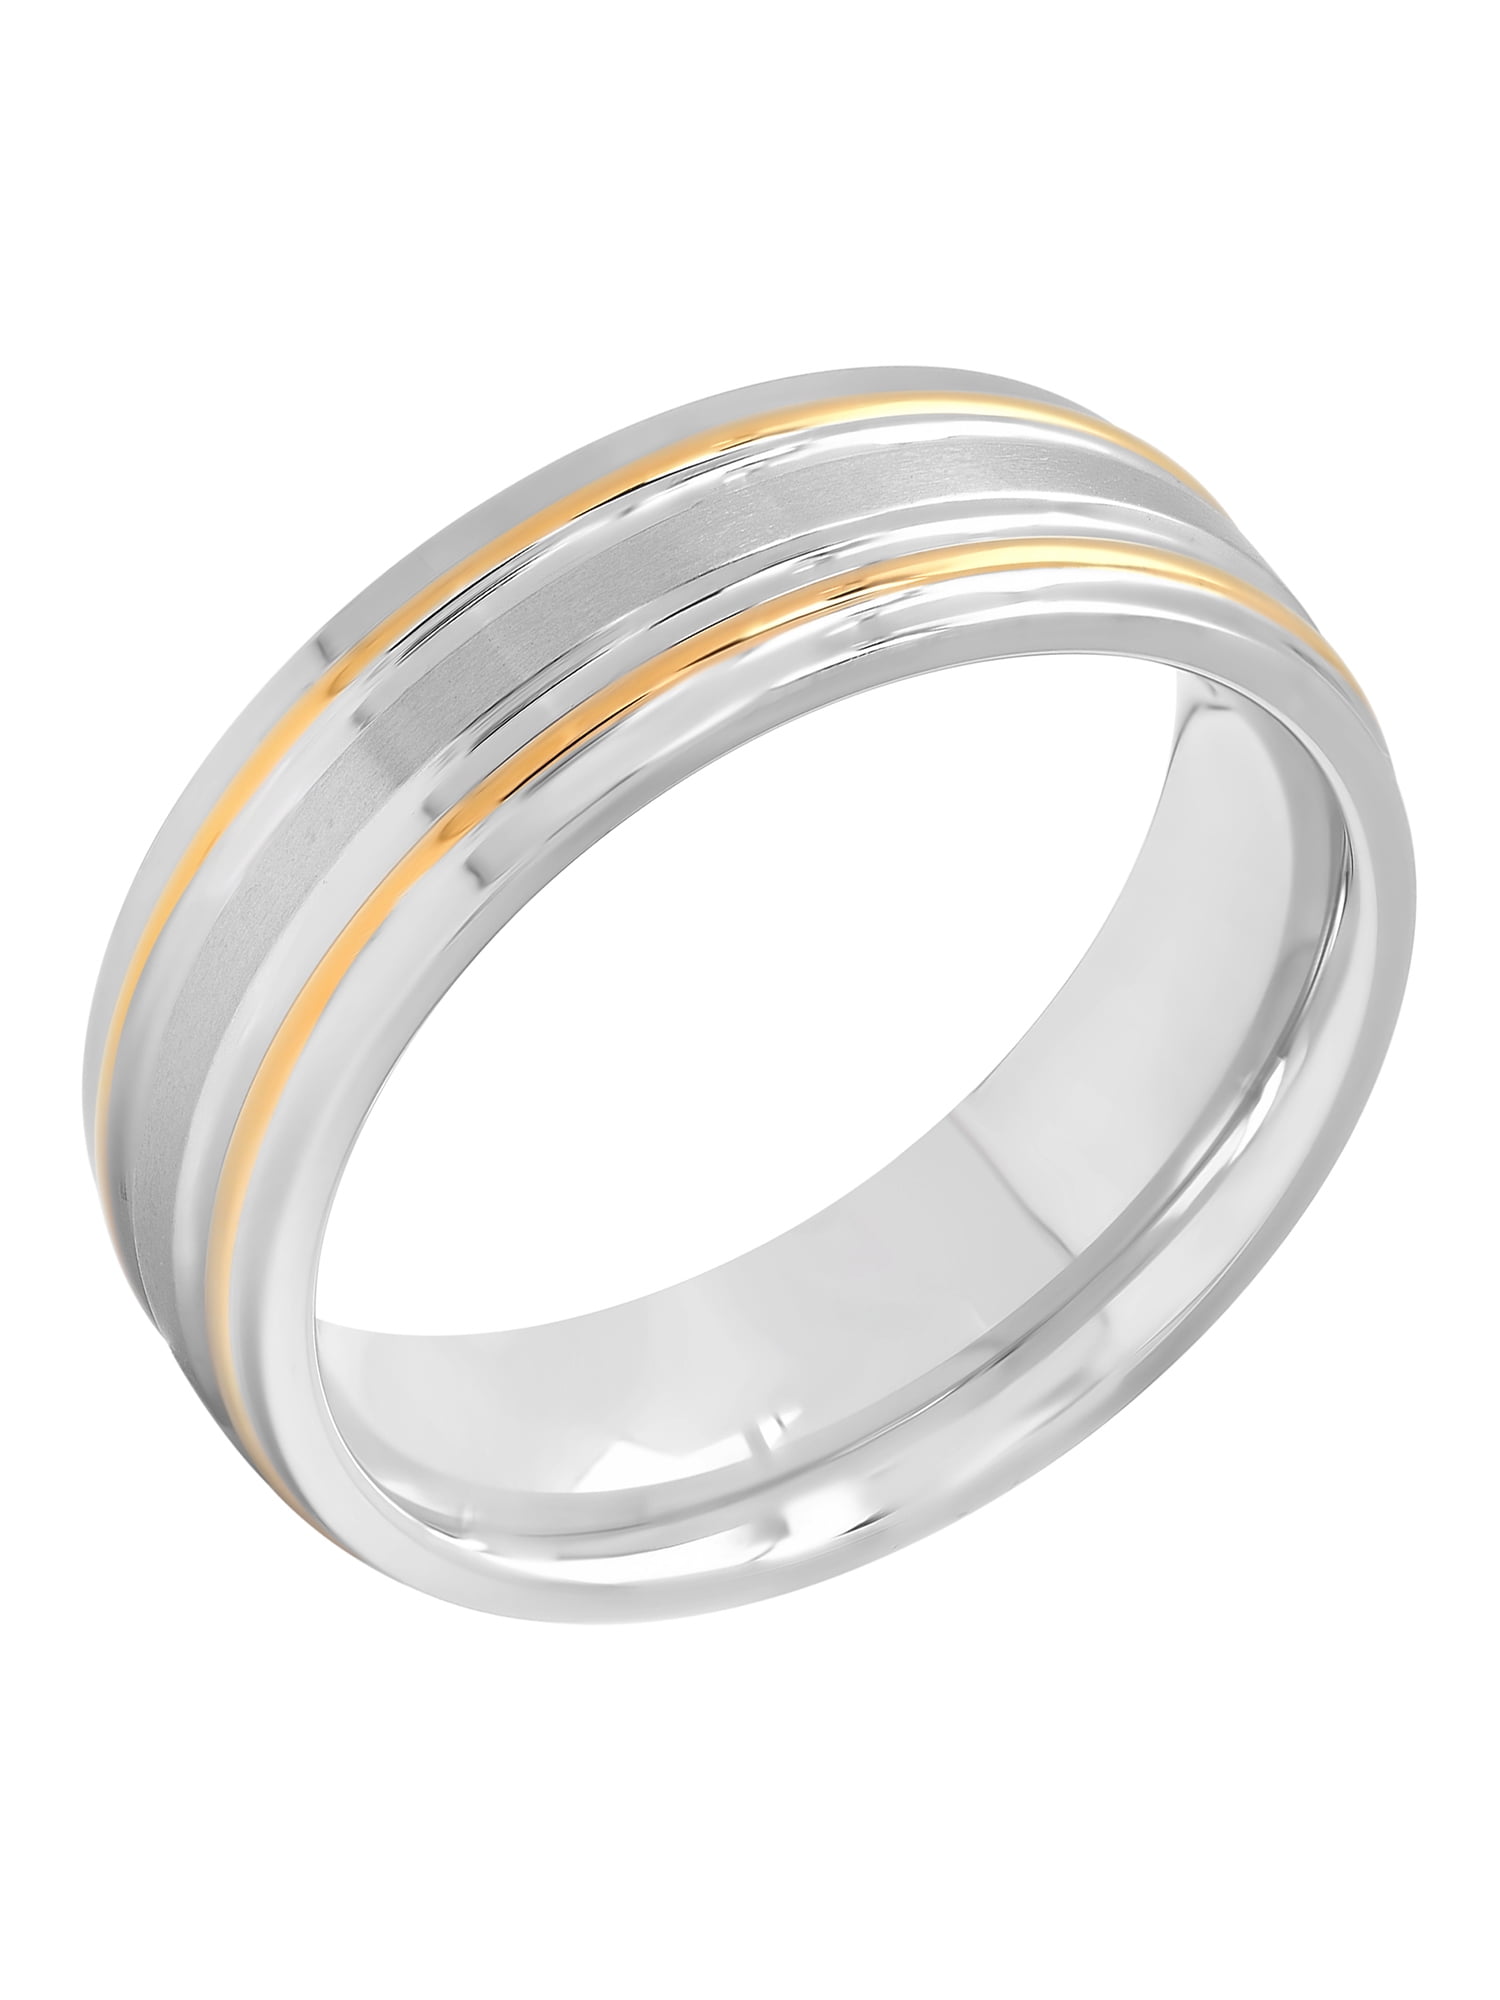 Stainless Steel Grooved Striped Comfort Fit Half-Round Wedding Band Ring 